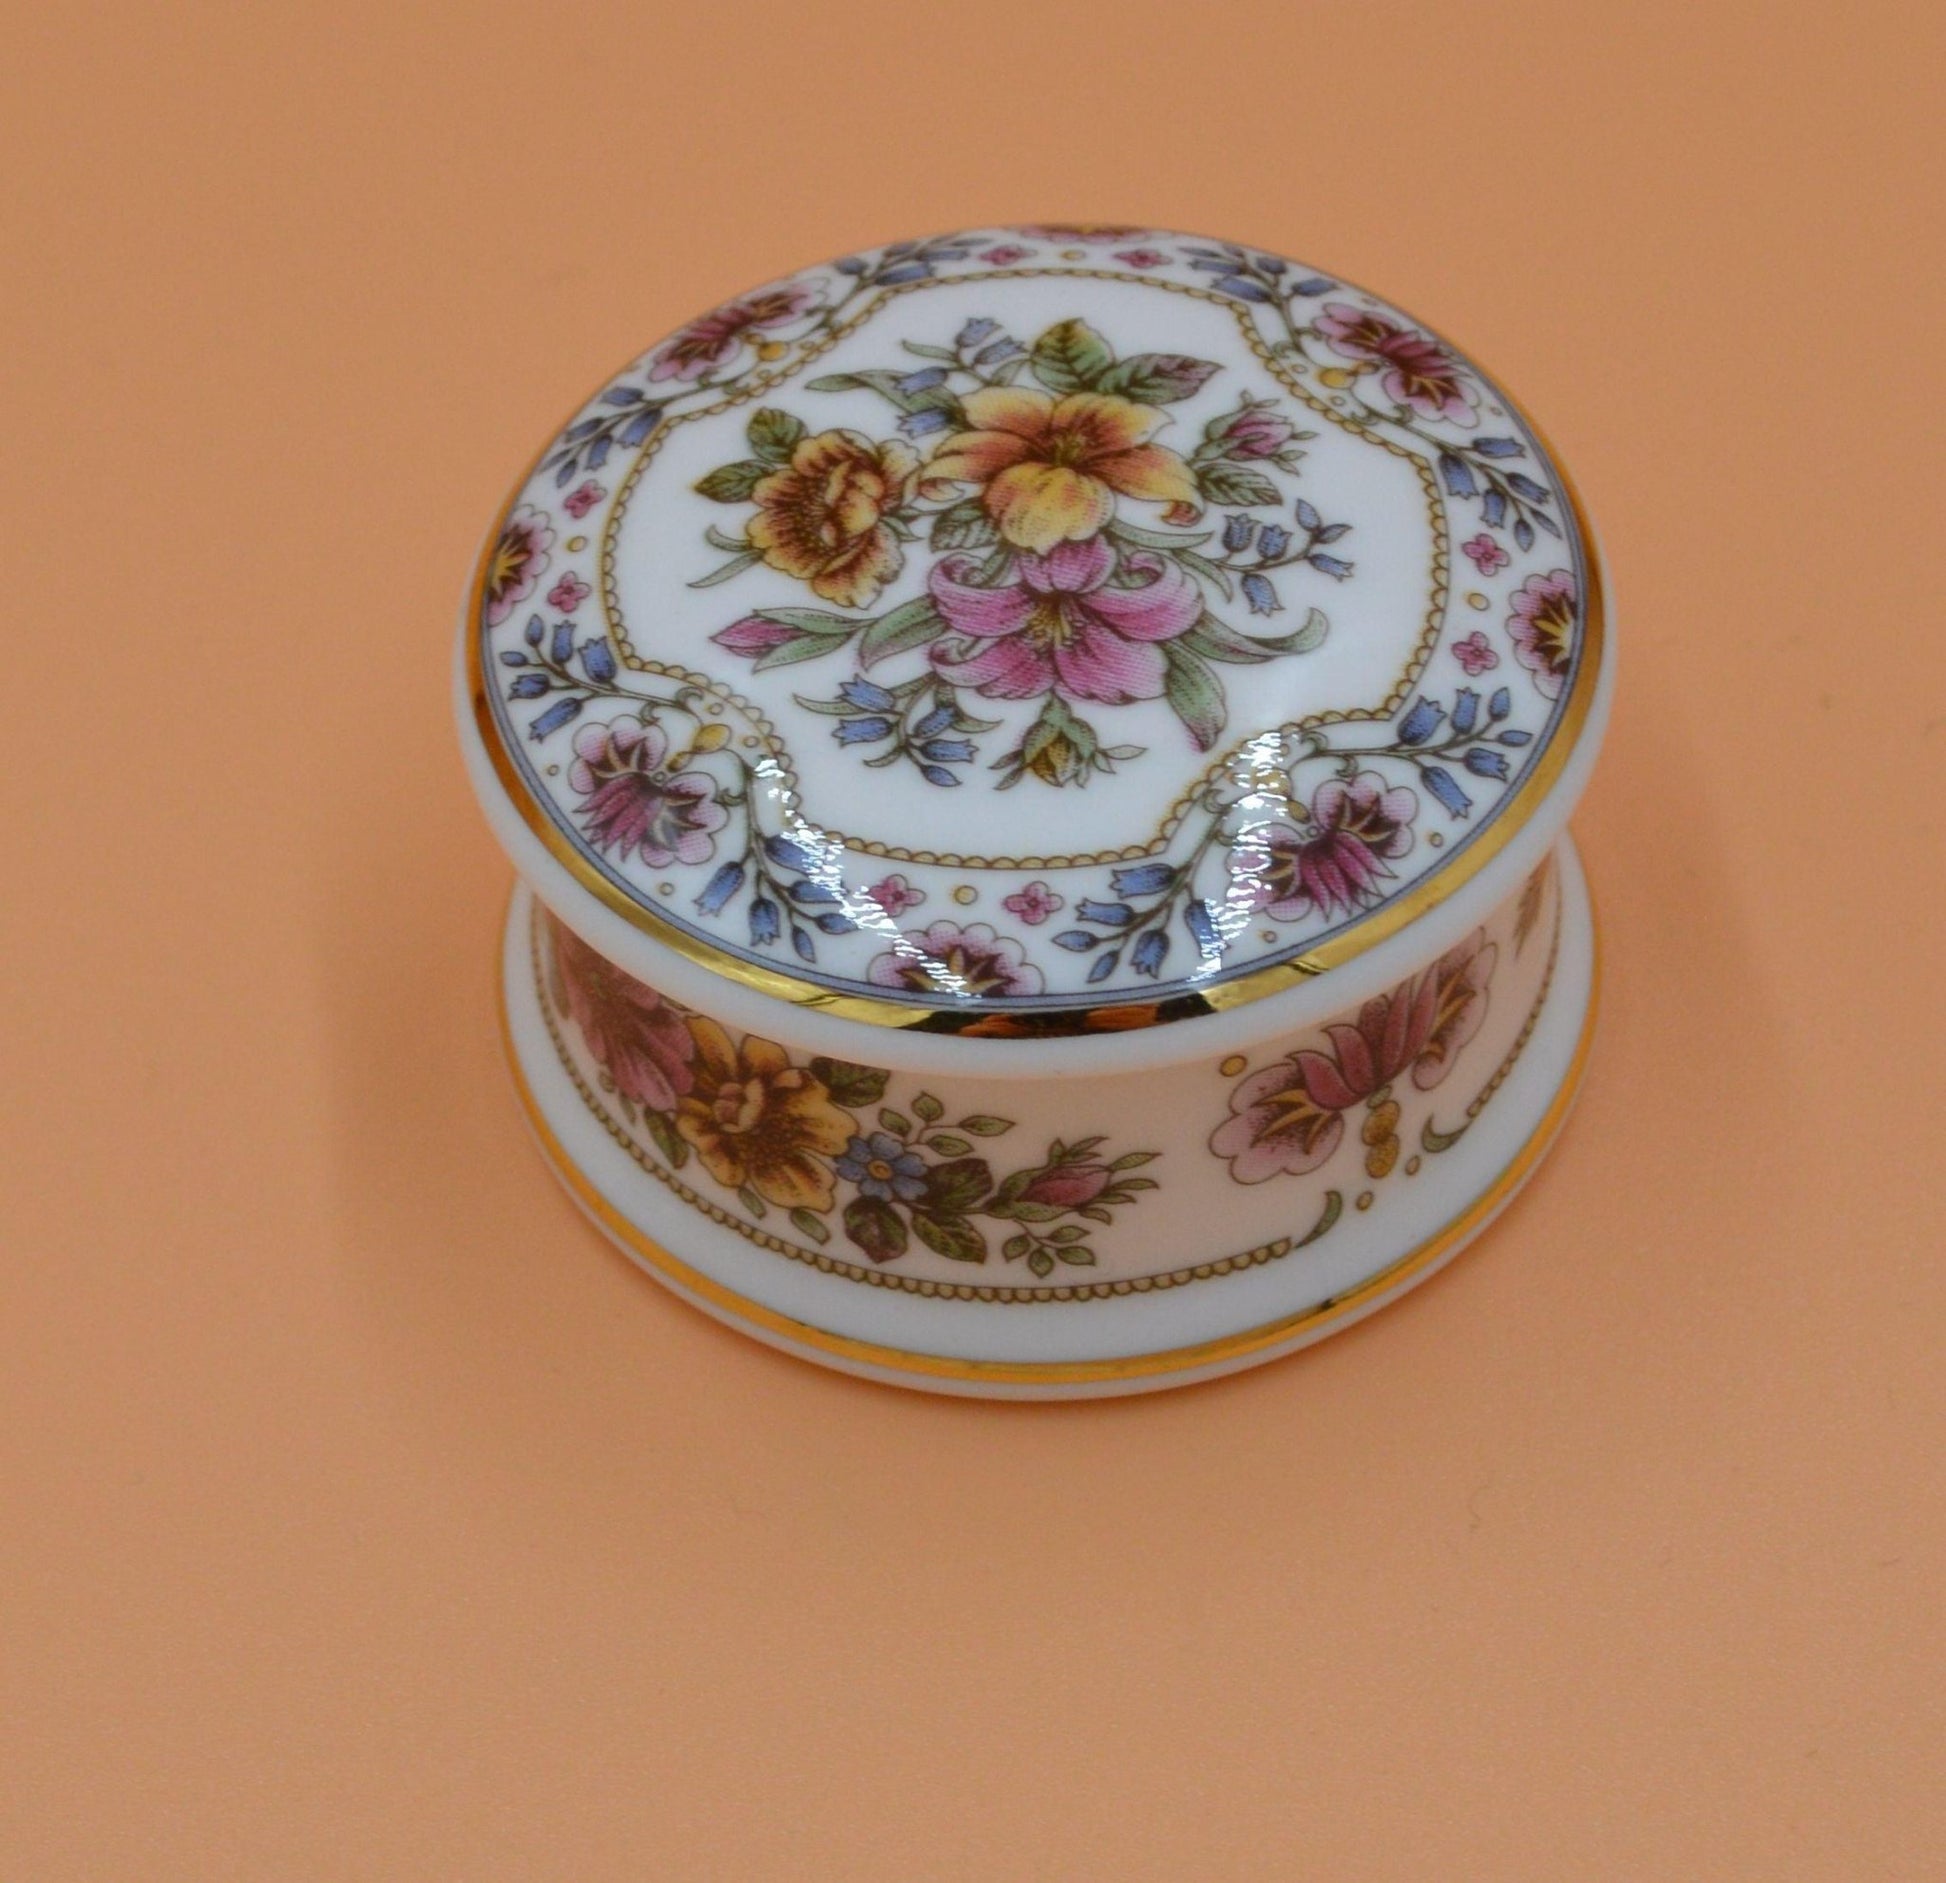 BONE CHINA STAFFORDSHIRE TRINKET POT WHITE WITH FLORAL DESIGN - TMD167207